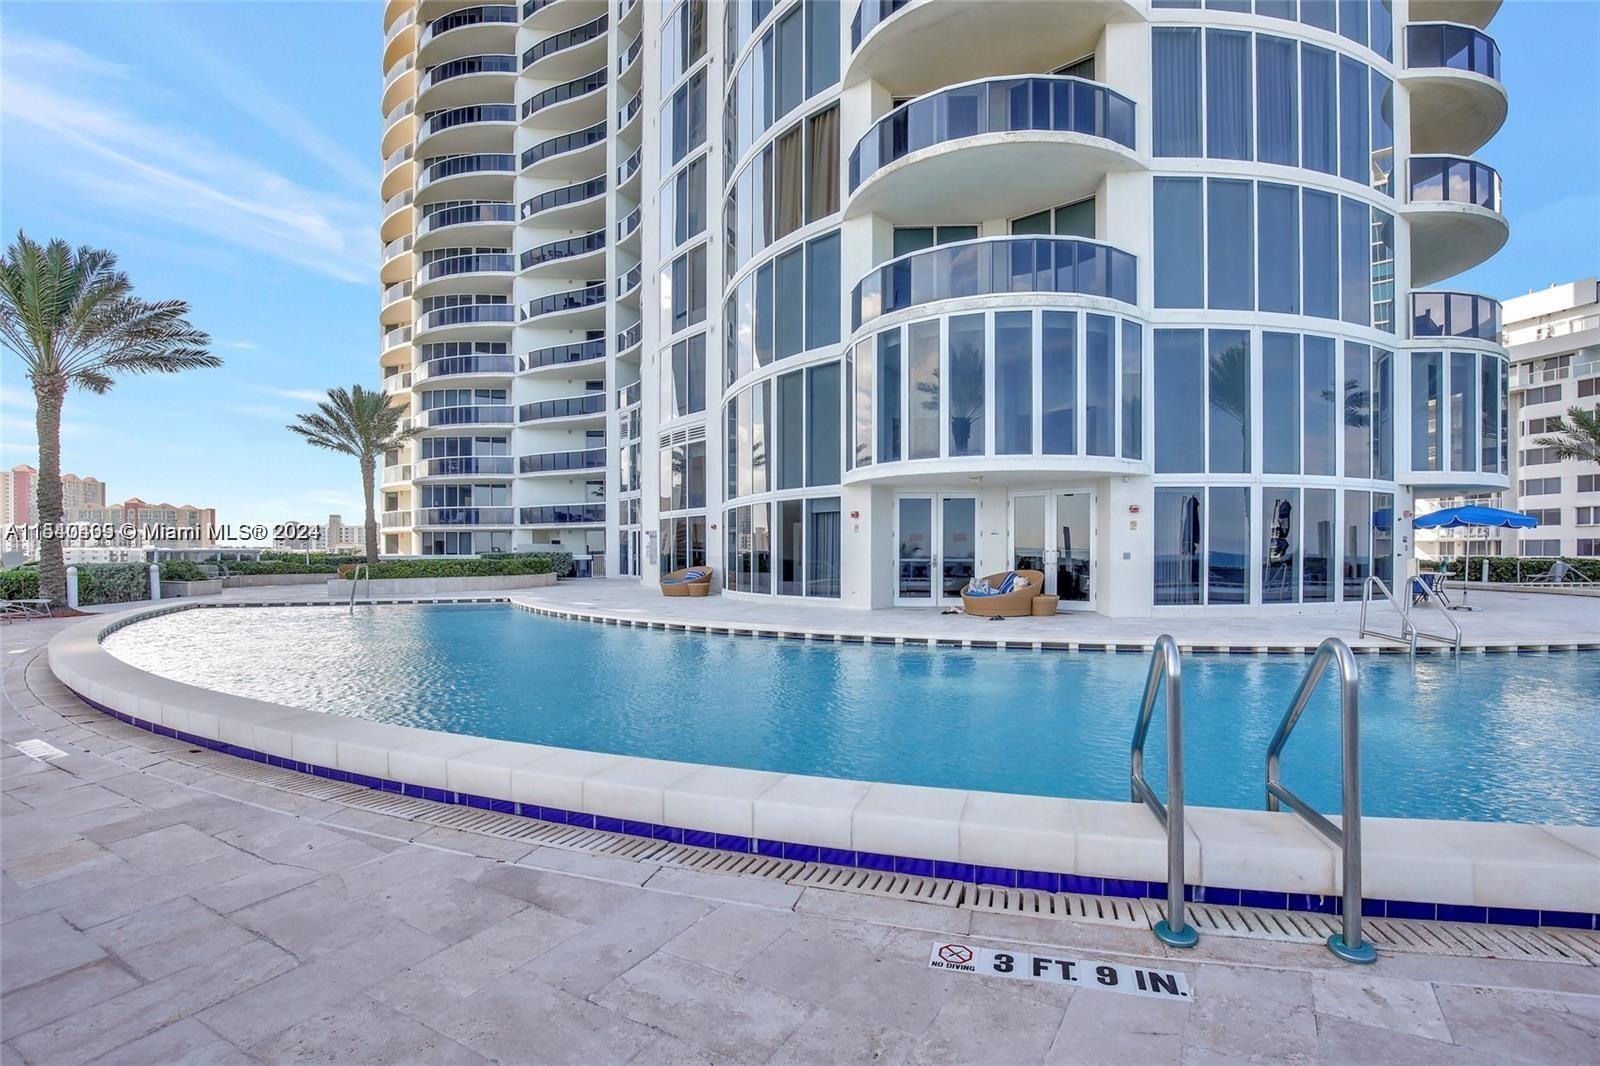 Photo of 17201 Collins Ave #3301 in Sunny Isles Beach, FL